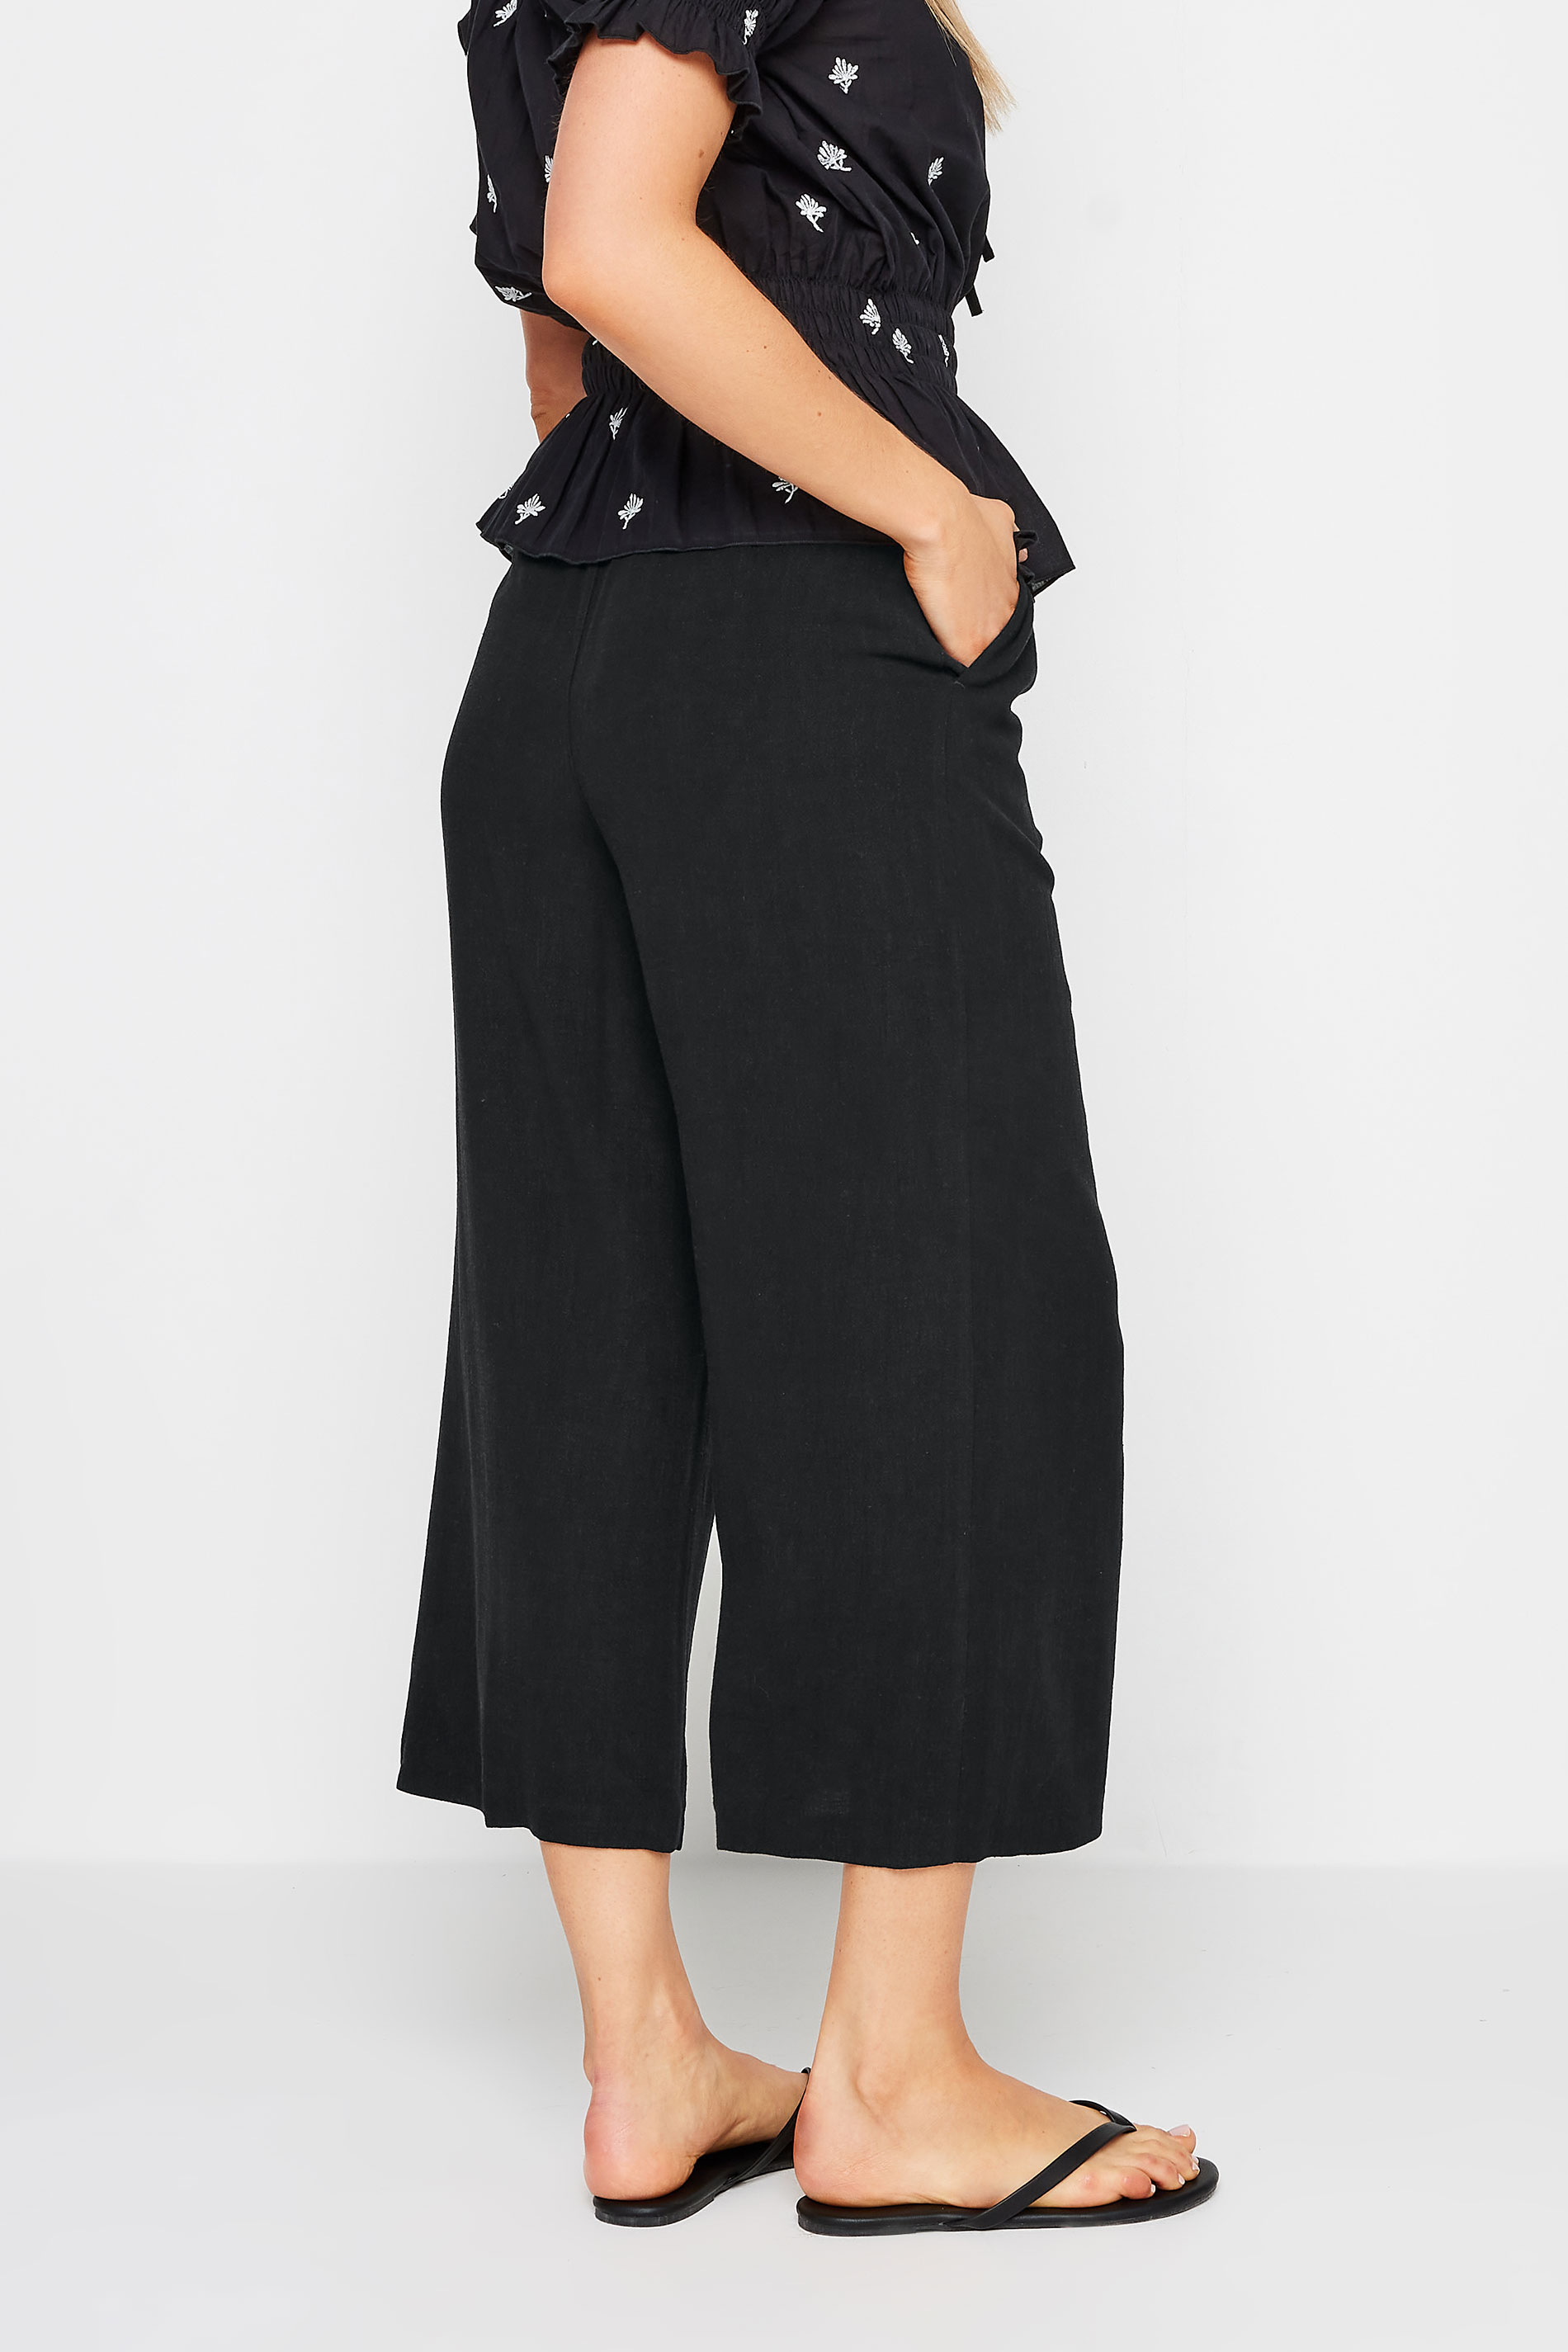 LTS Tall Women's Black Linen Cropped Trousers | Long Tall Sally  3